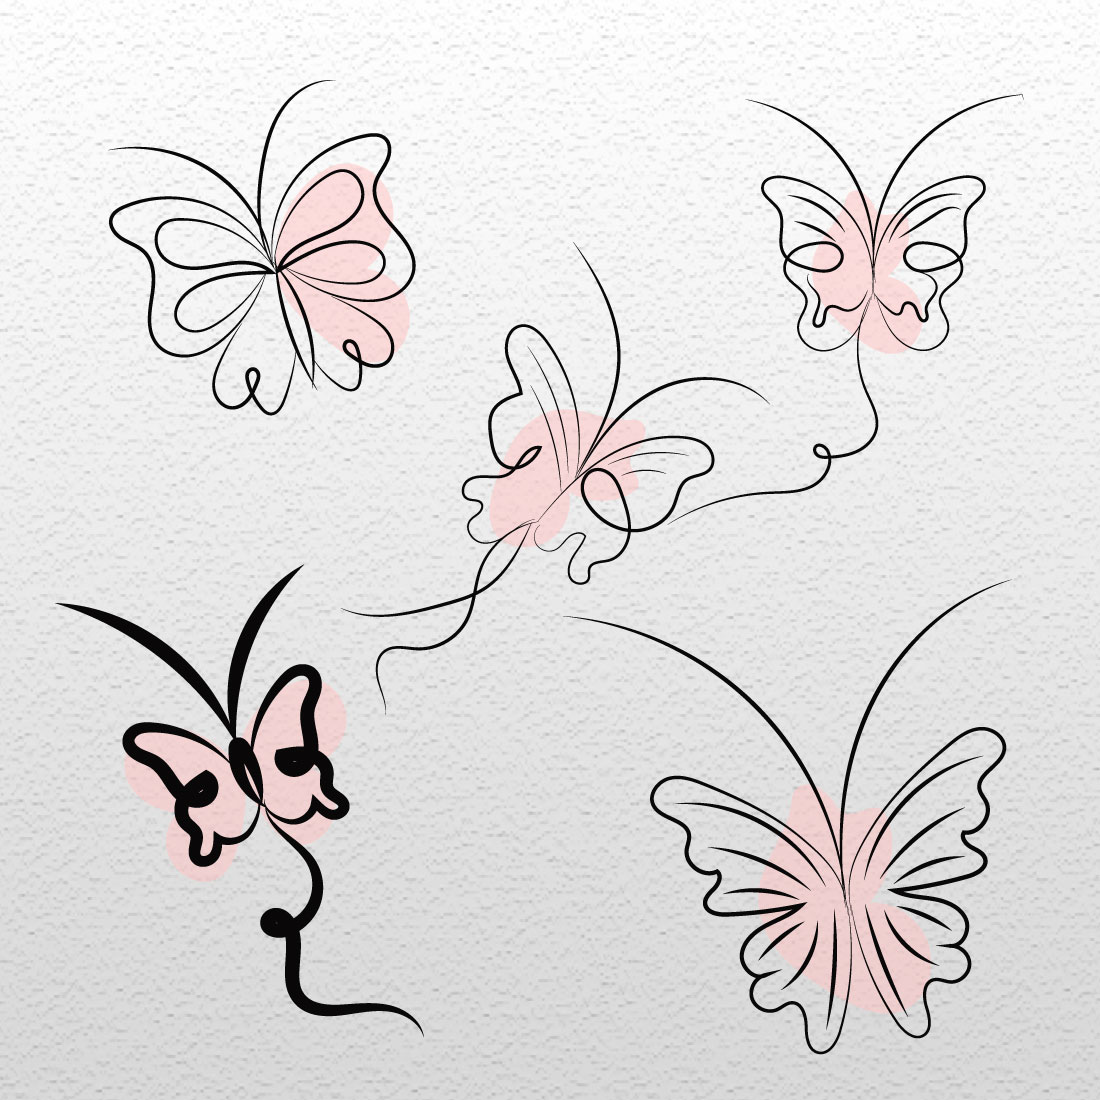 Drawing of three butterflies on a white background.